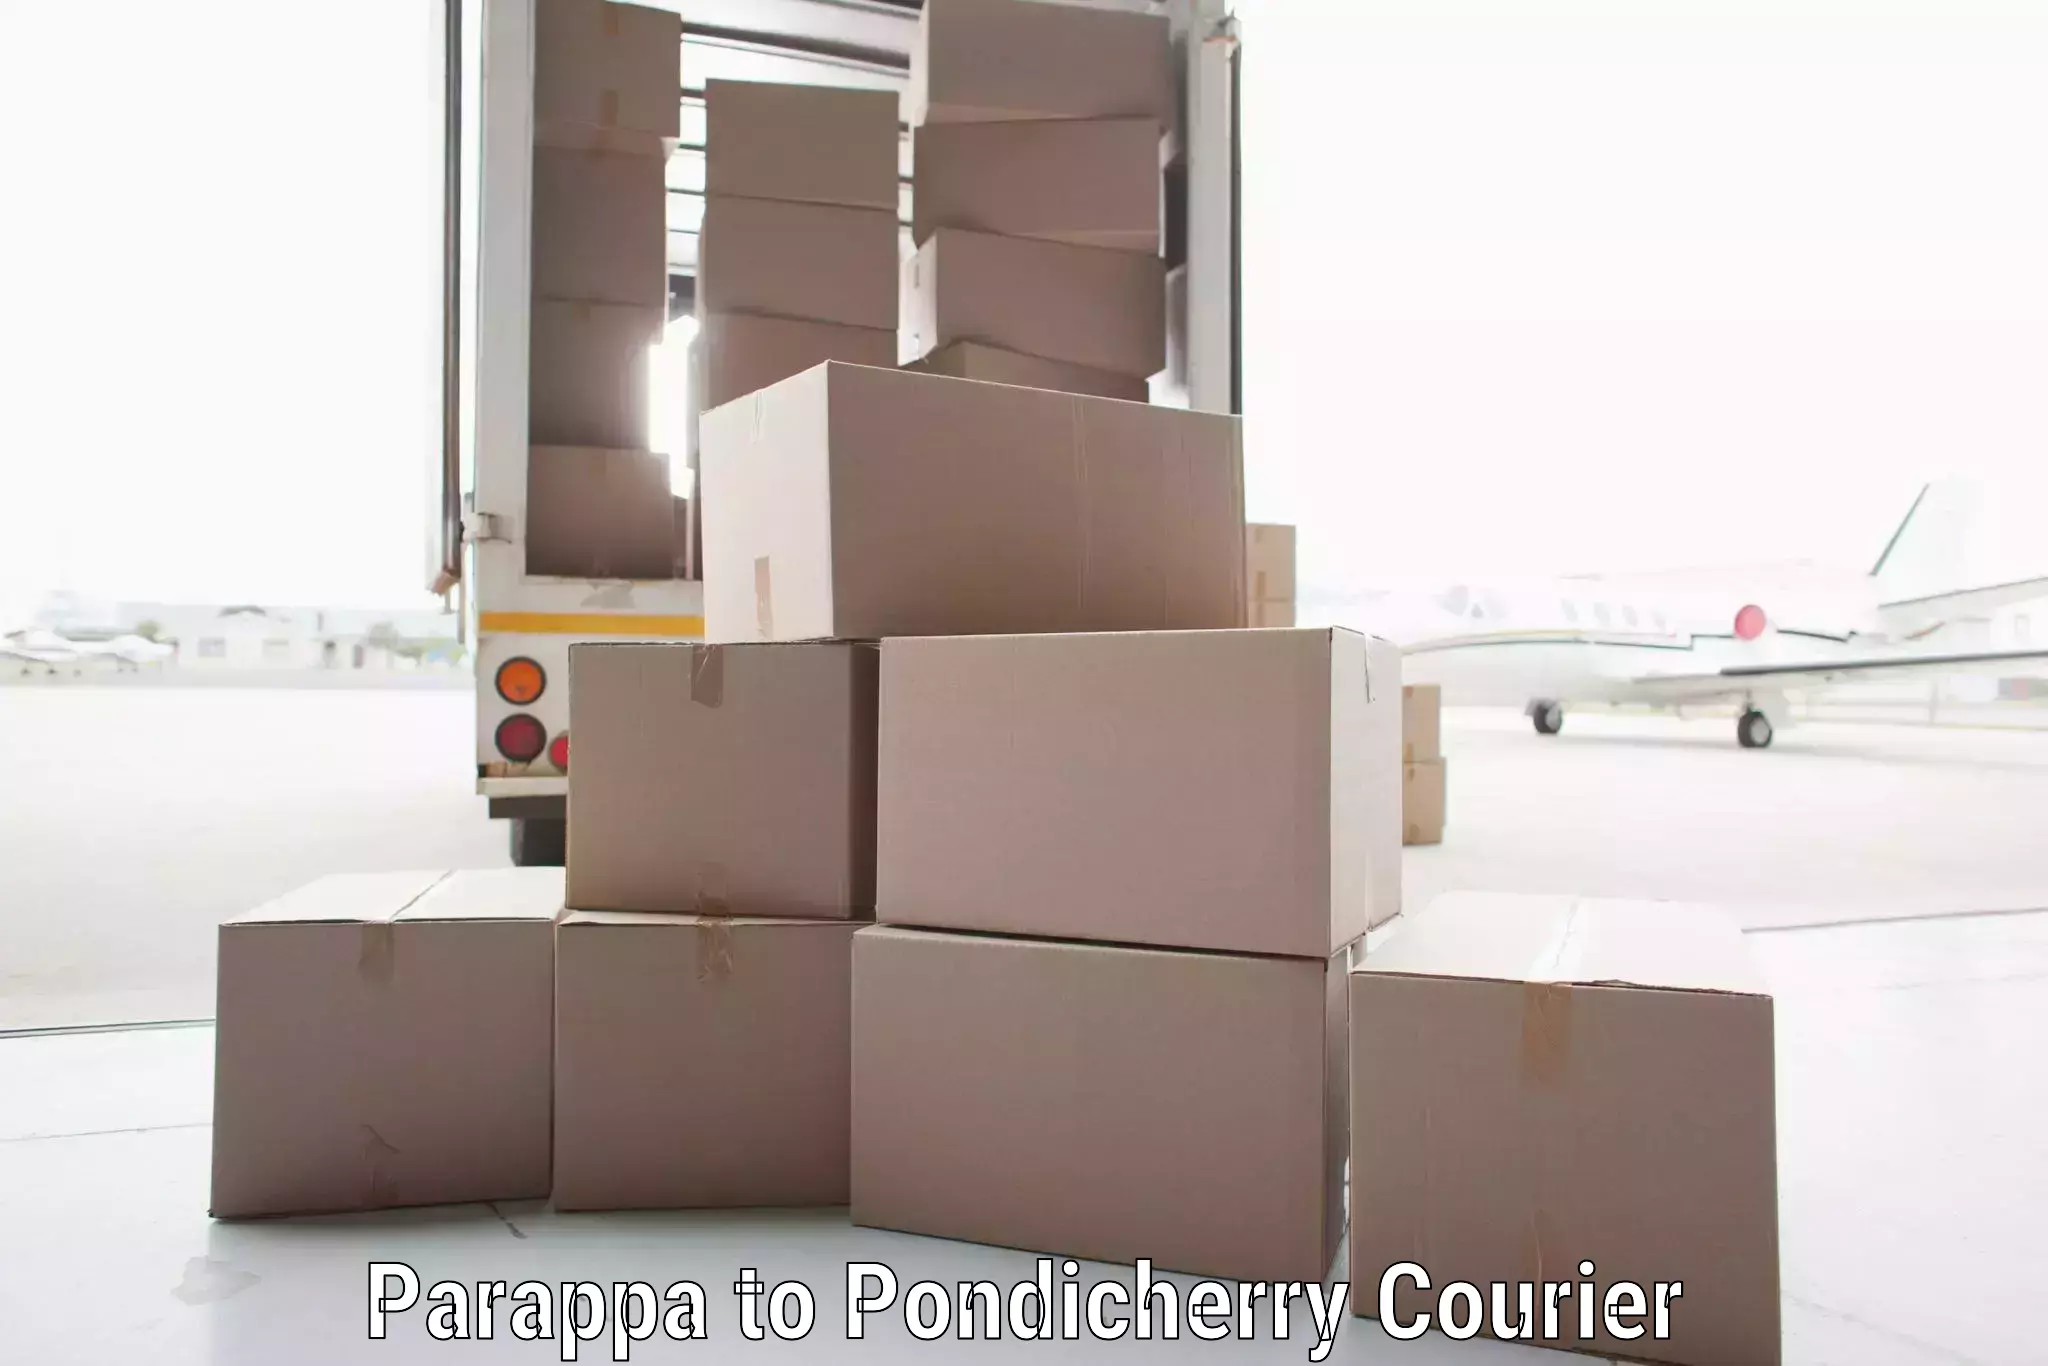 Nationwide courier service Parappa to Pondicherry